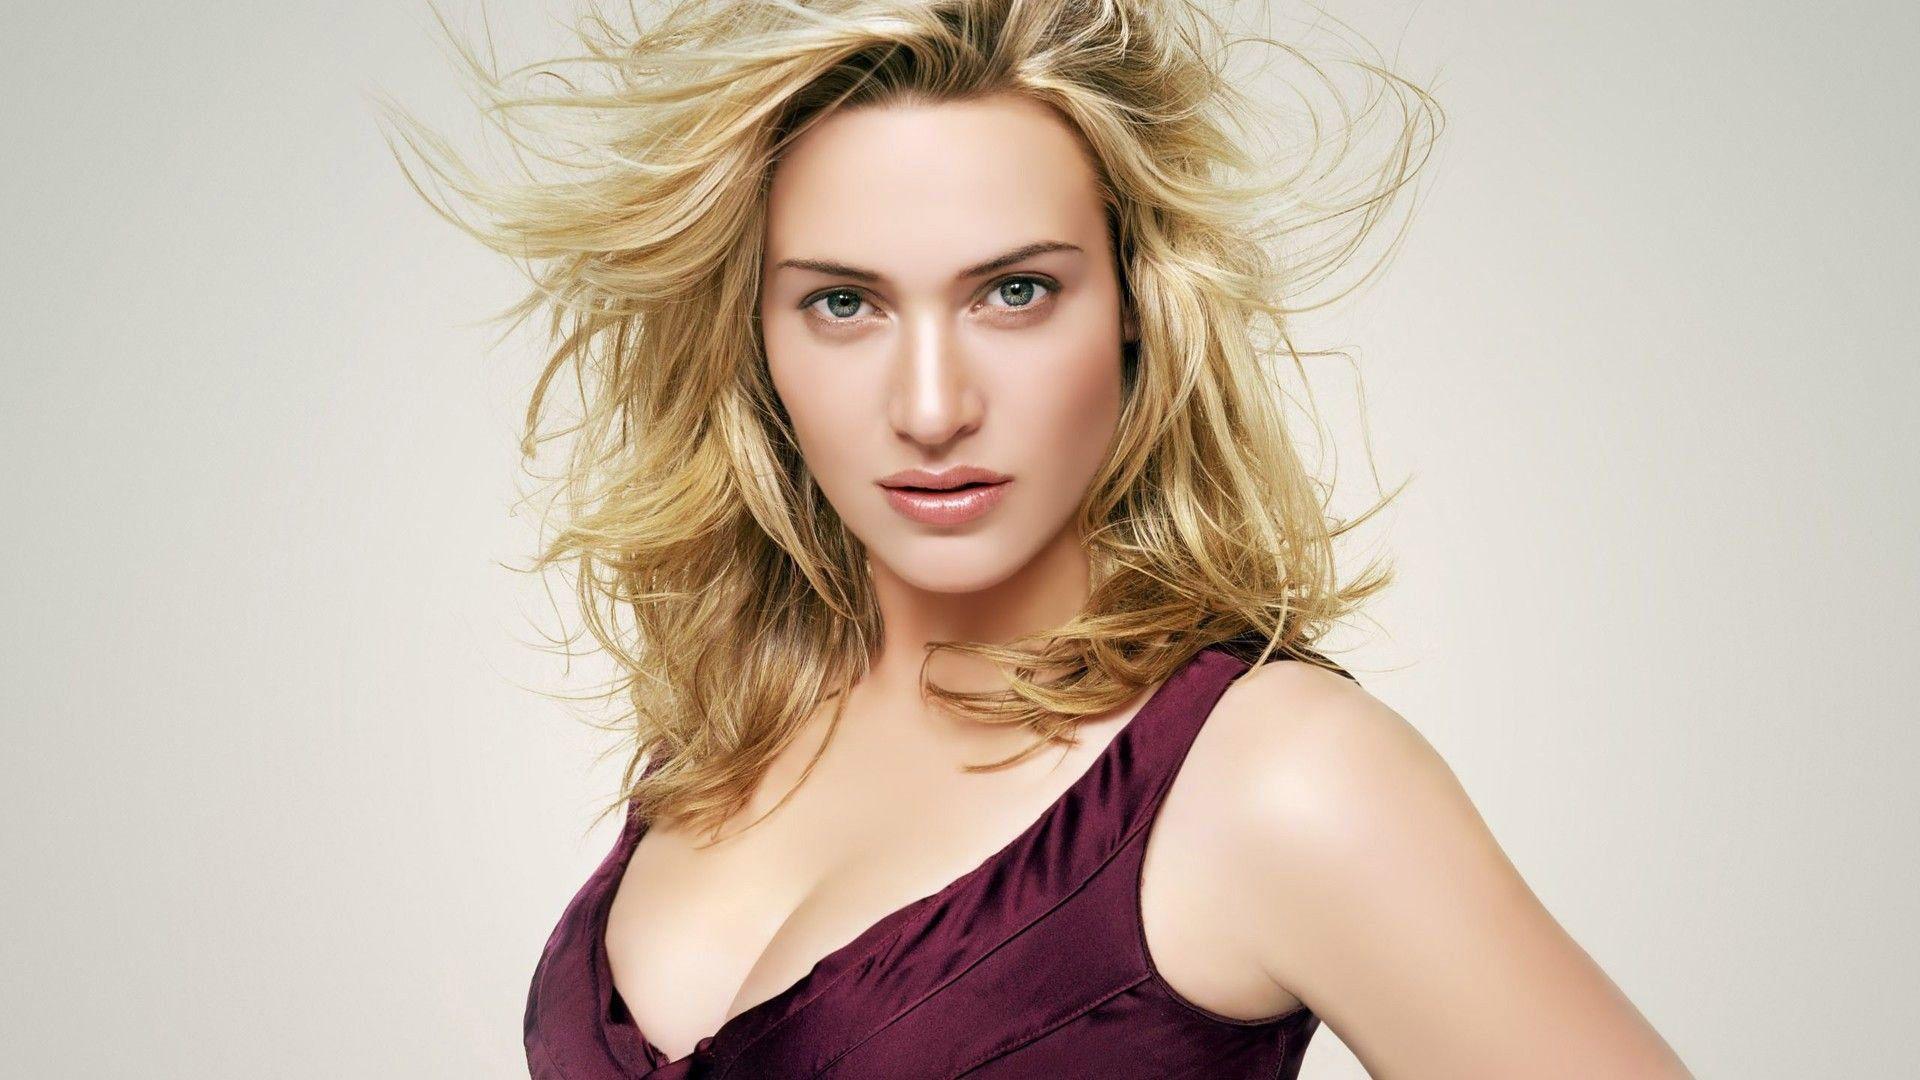 Kate Winslet Wallpaper Image Photo Picture Background